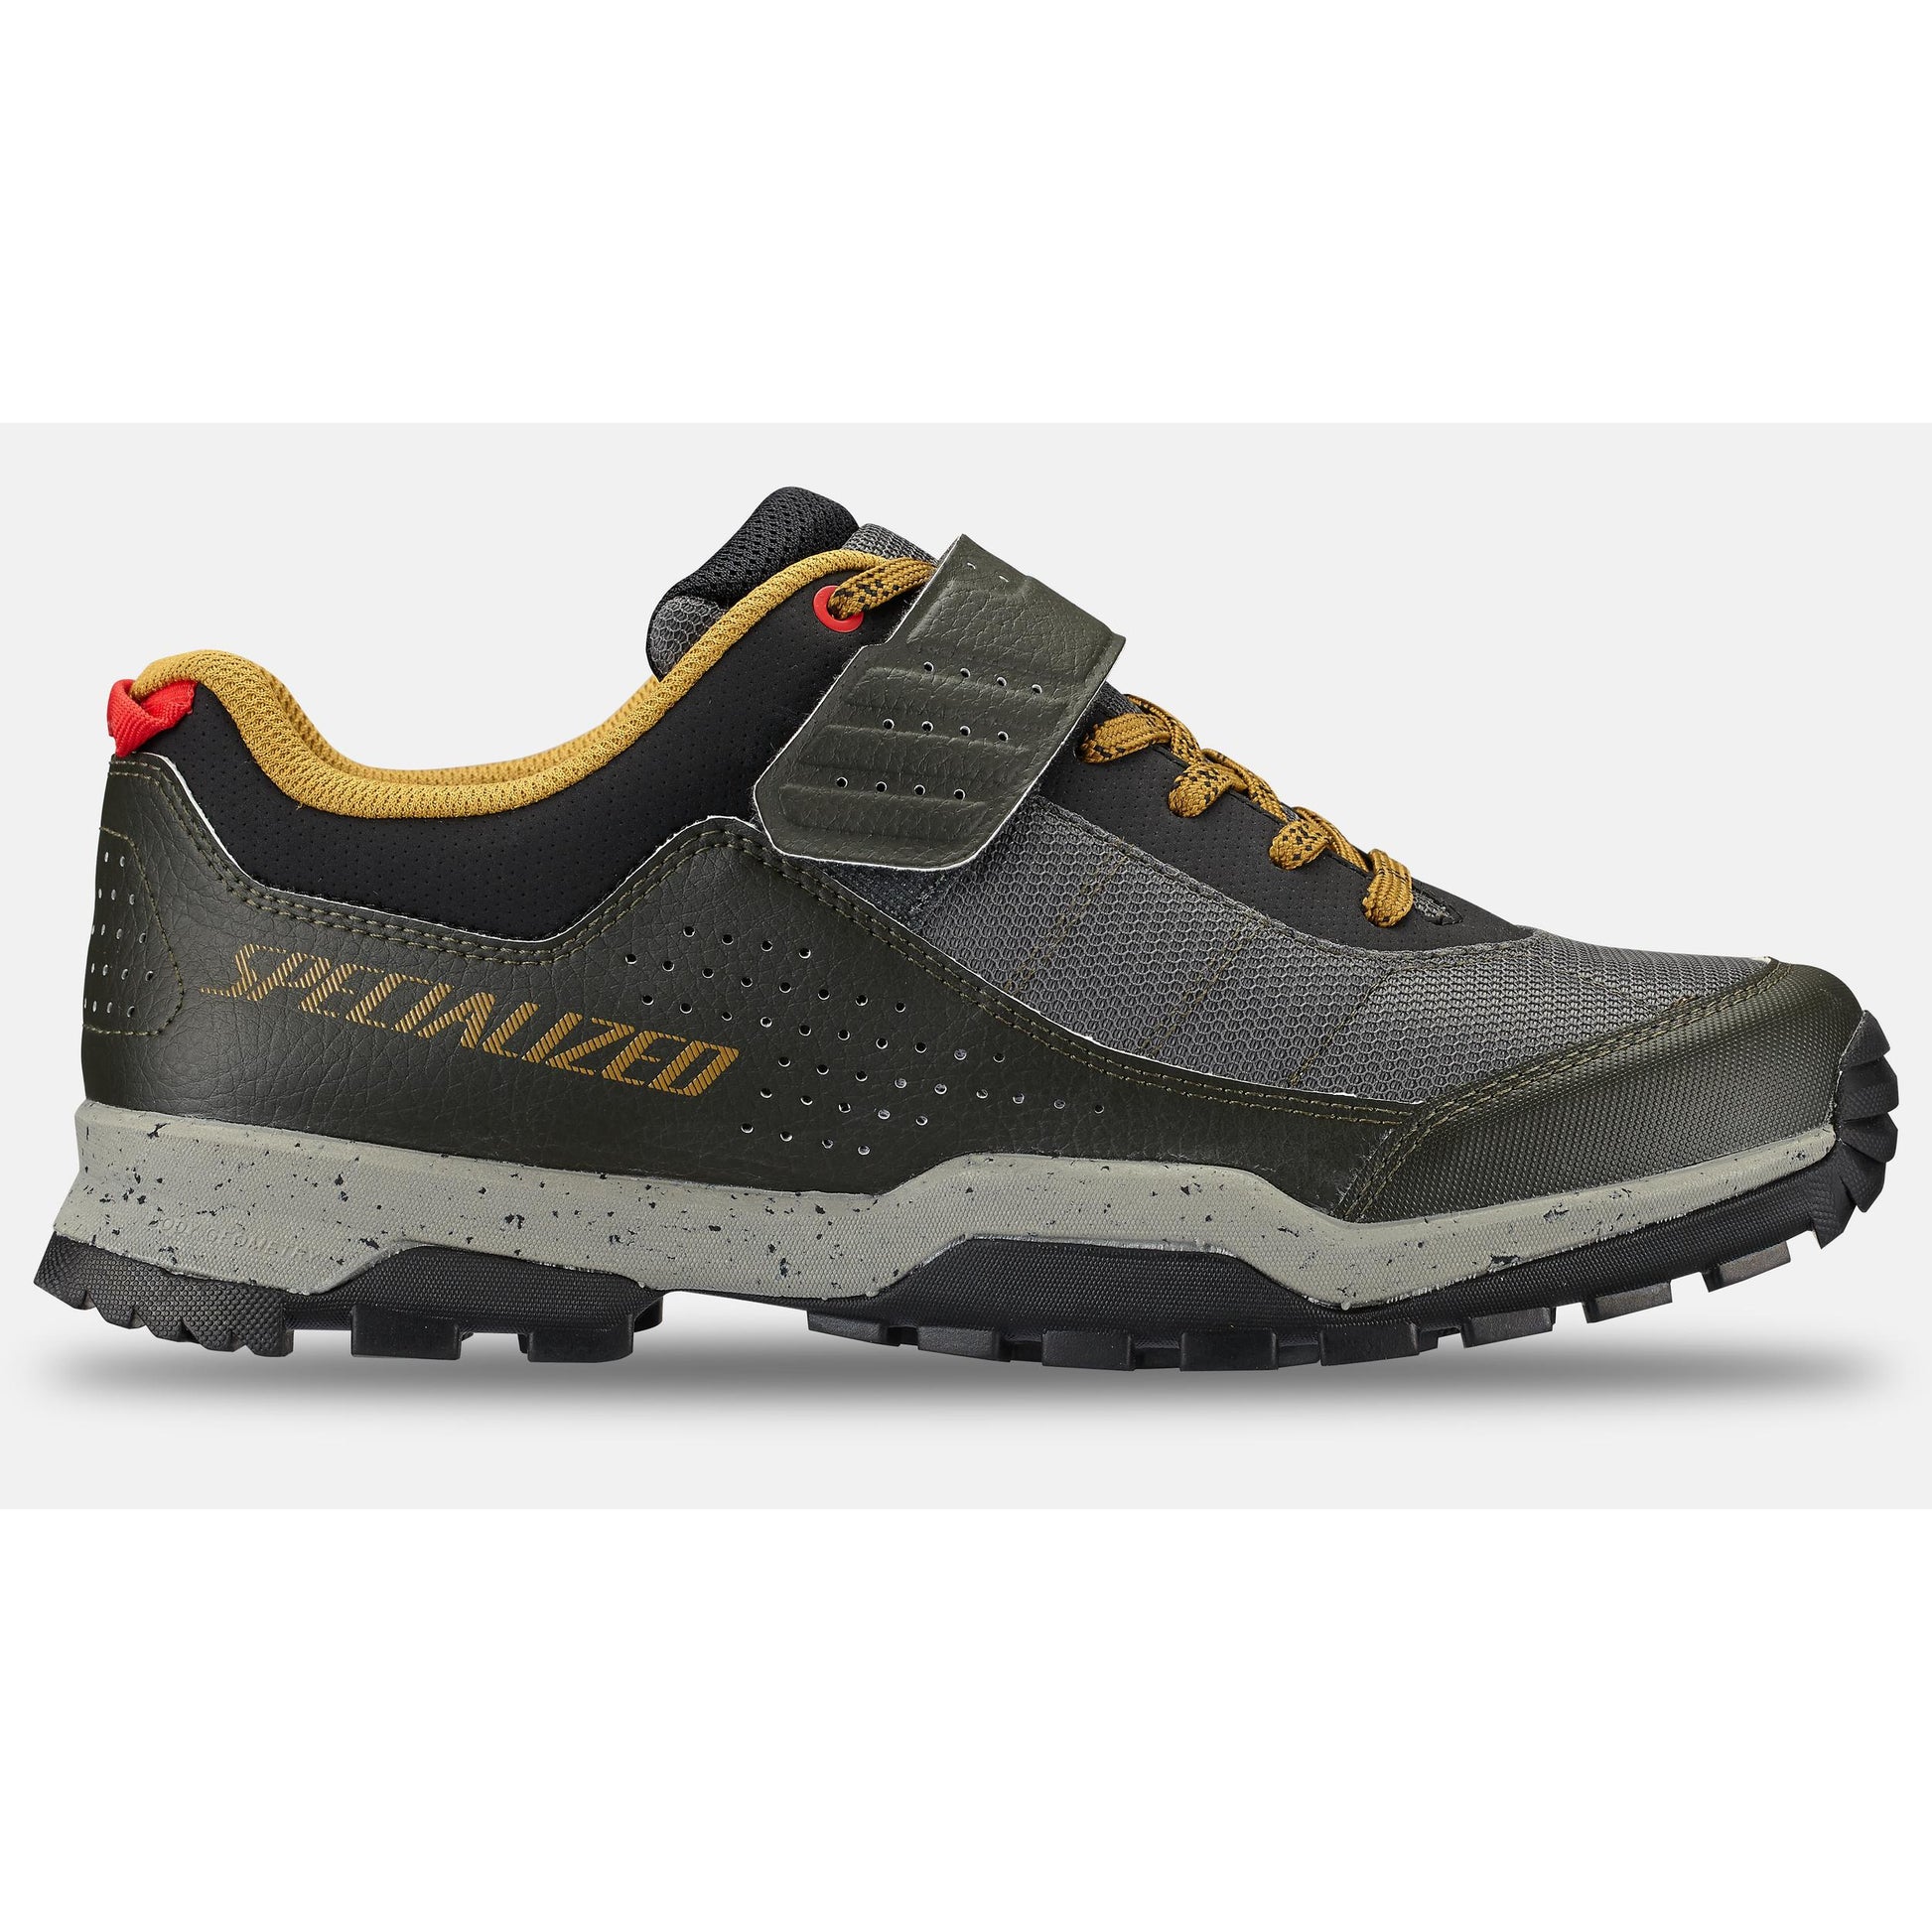 Specialized RIME 1.0 Mountain Bike Shoes - Shoes - Bicycle Warehouse